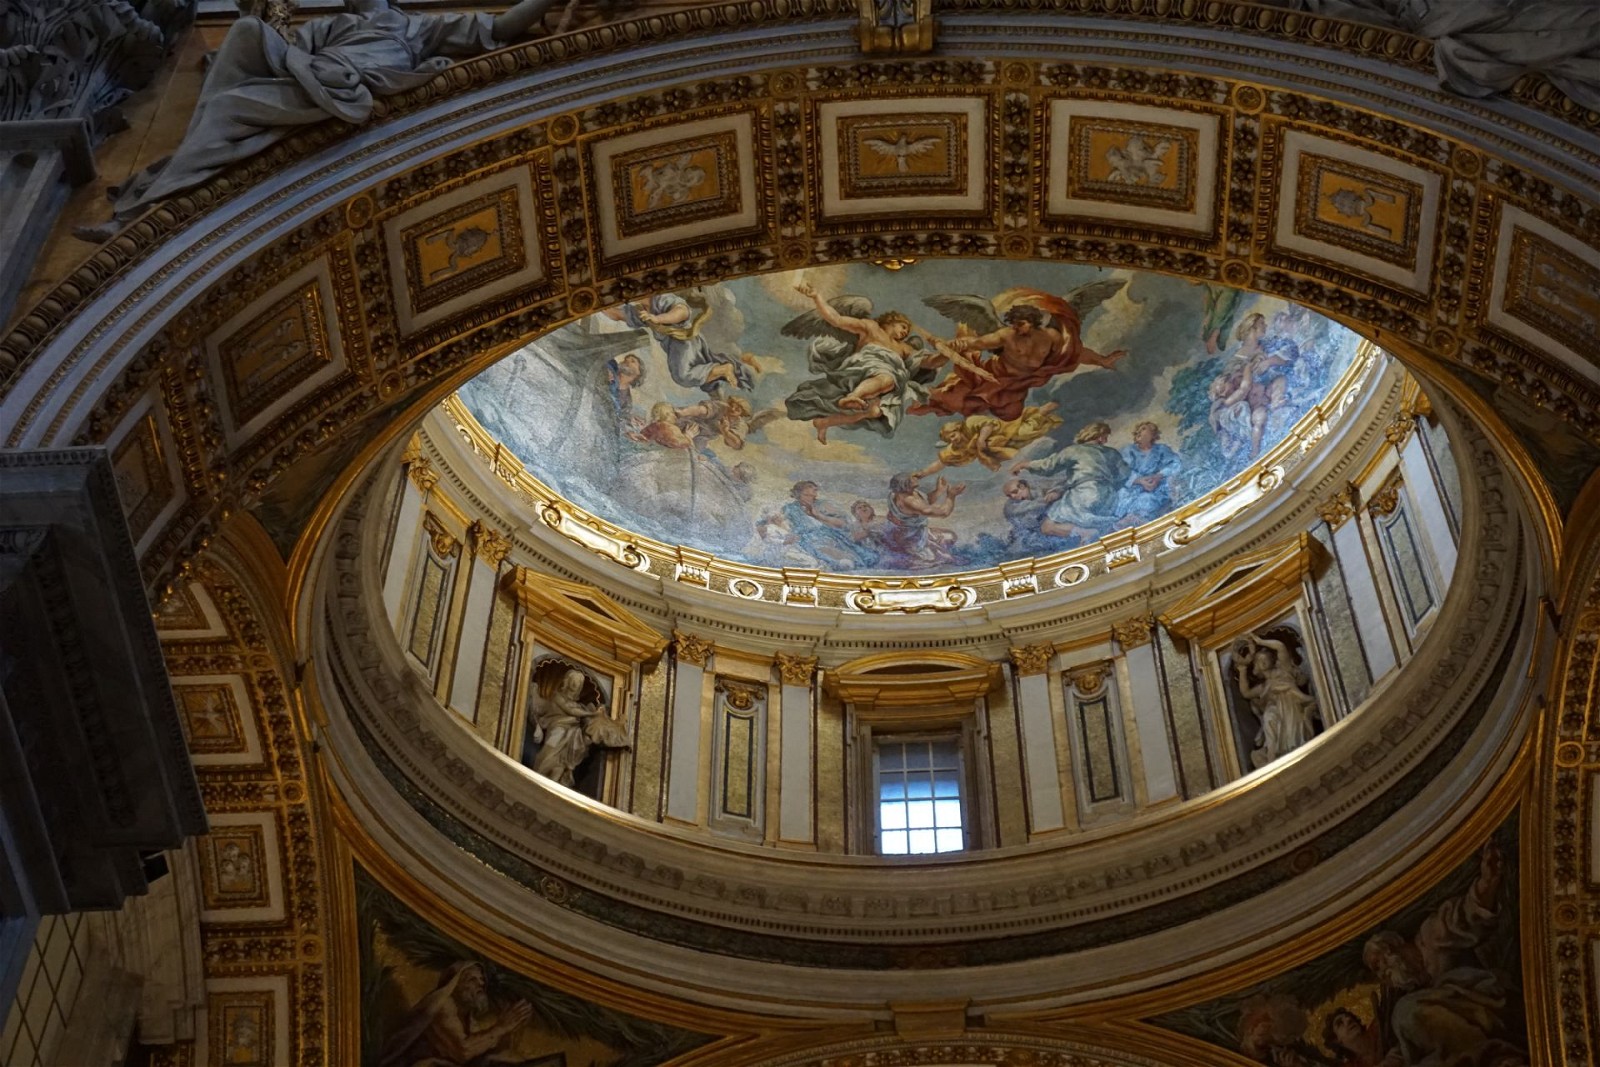 If you're planning a trip to Rome, you simply can't miss the Vatican Museums! Trust me, I've been there, and it's a jaw-dropping experience.